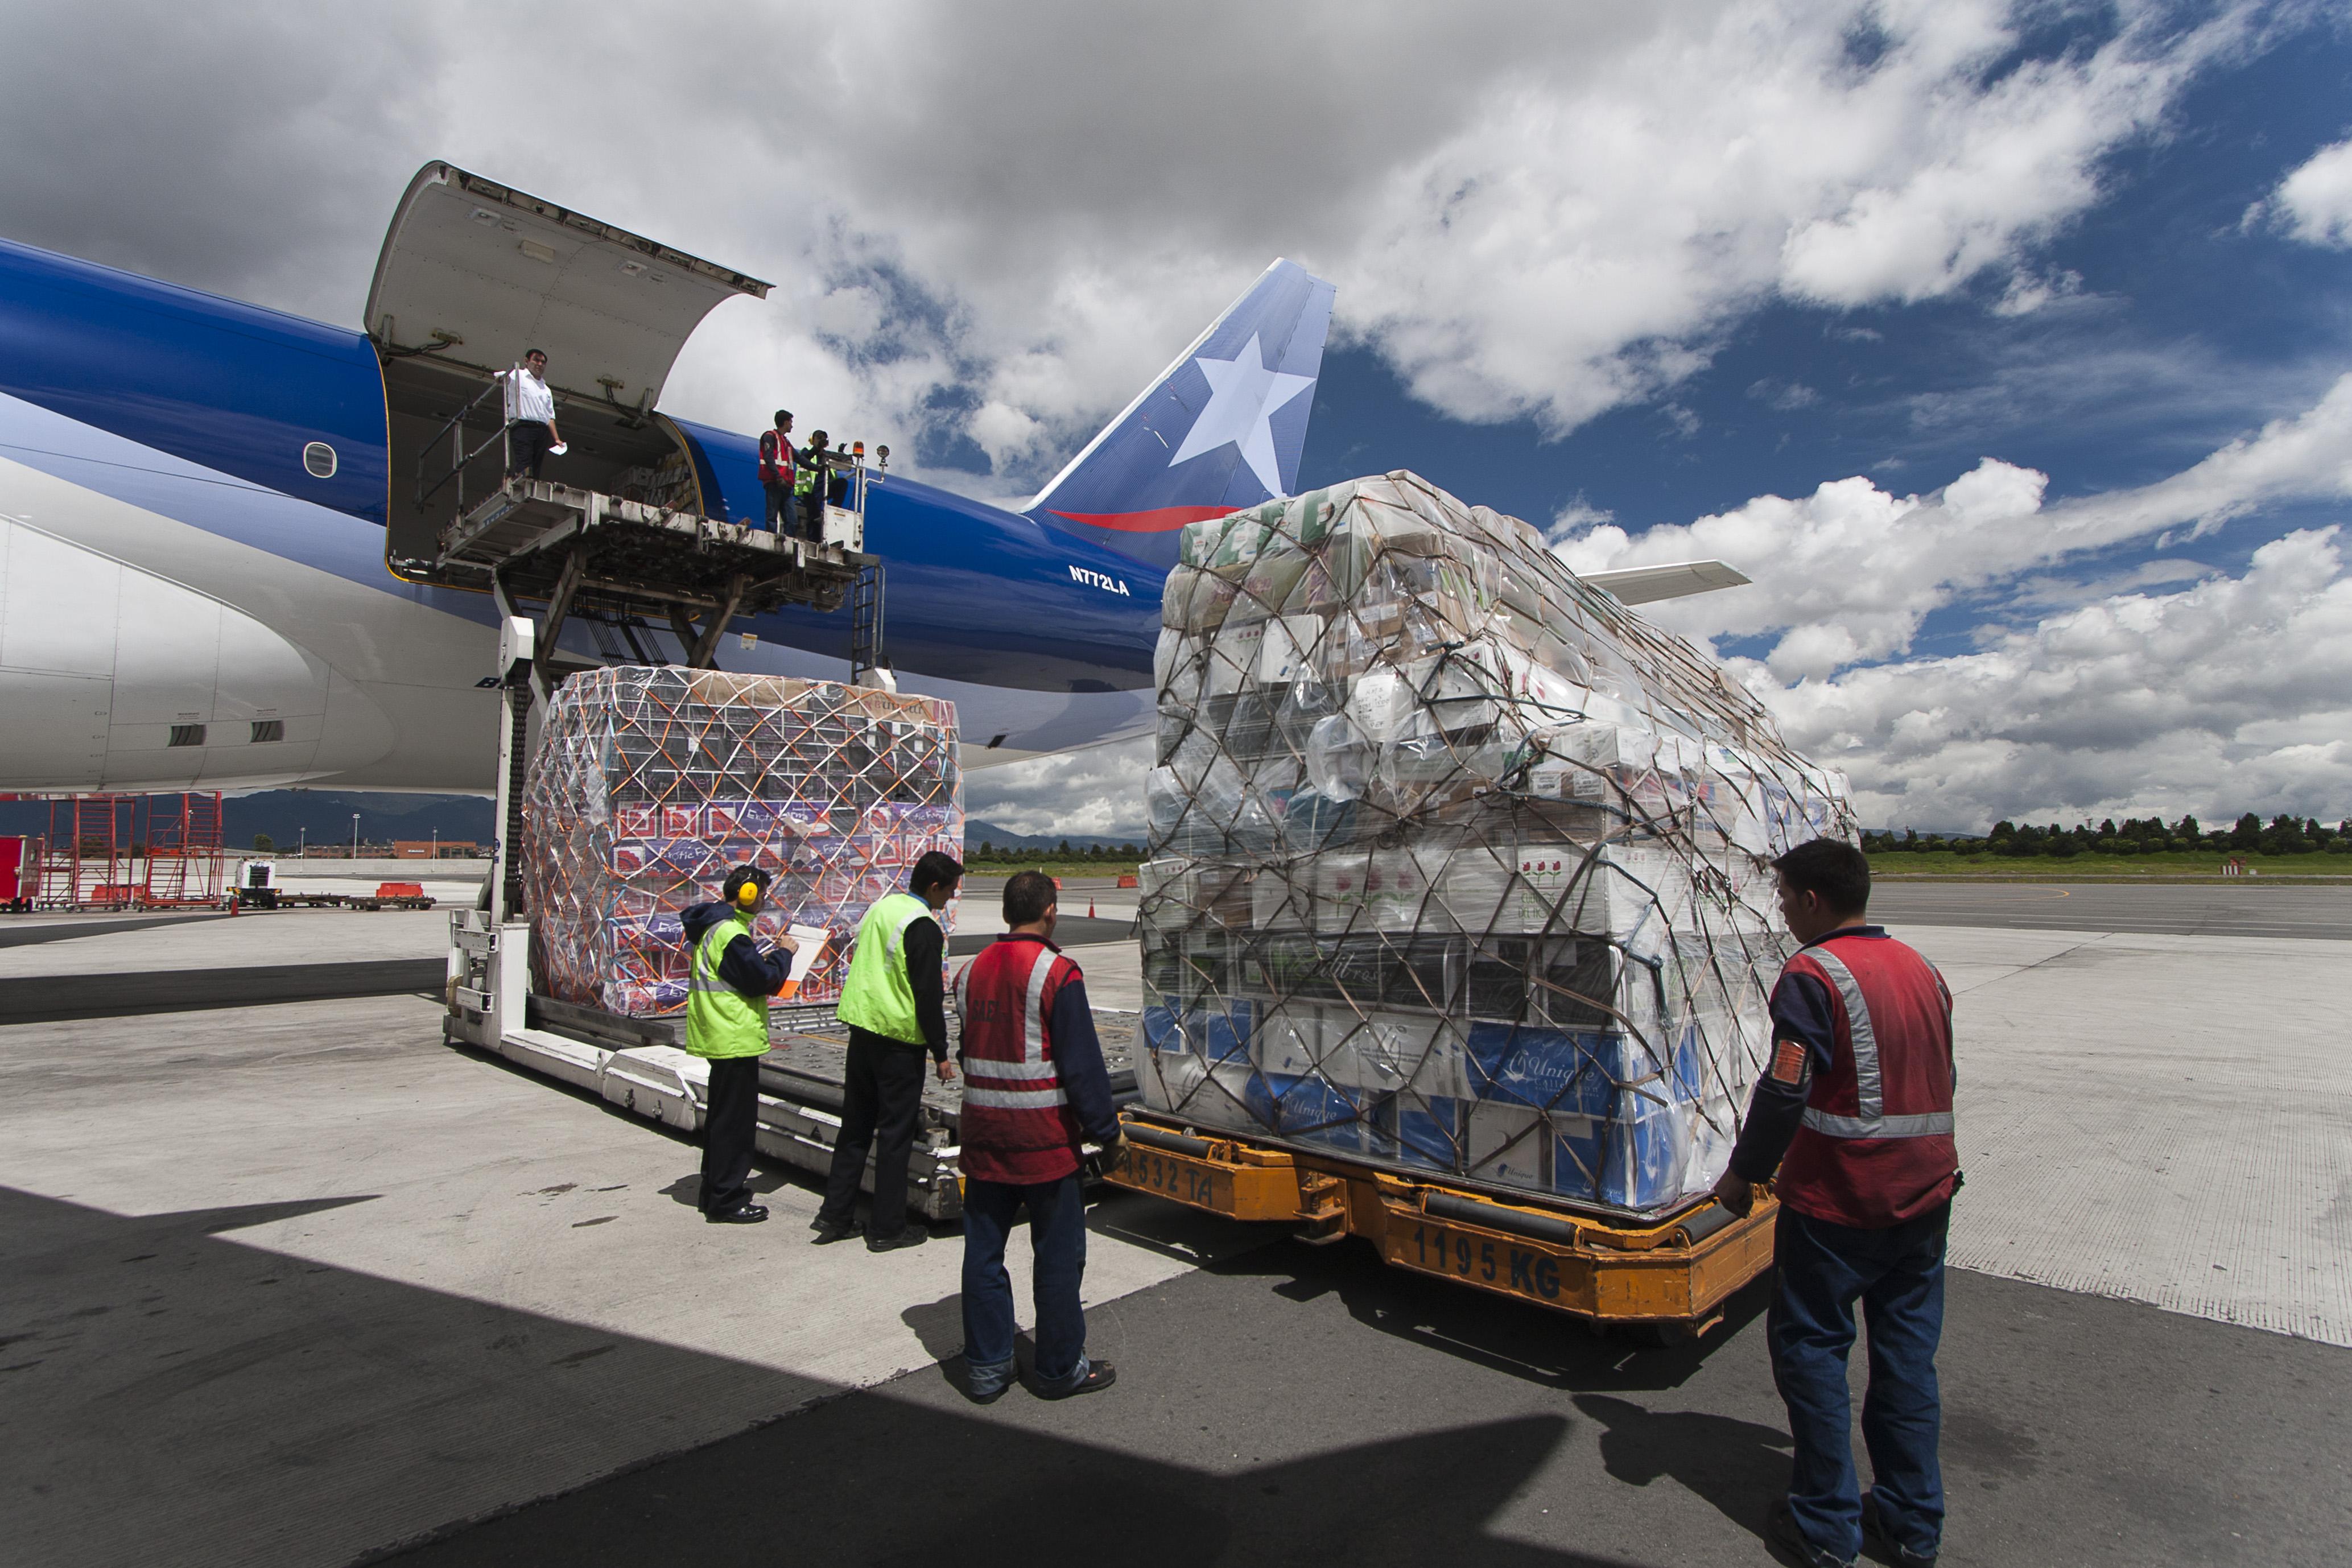 LATAM Group leads the cargo operation in South America for flower